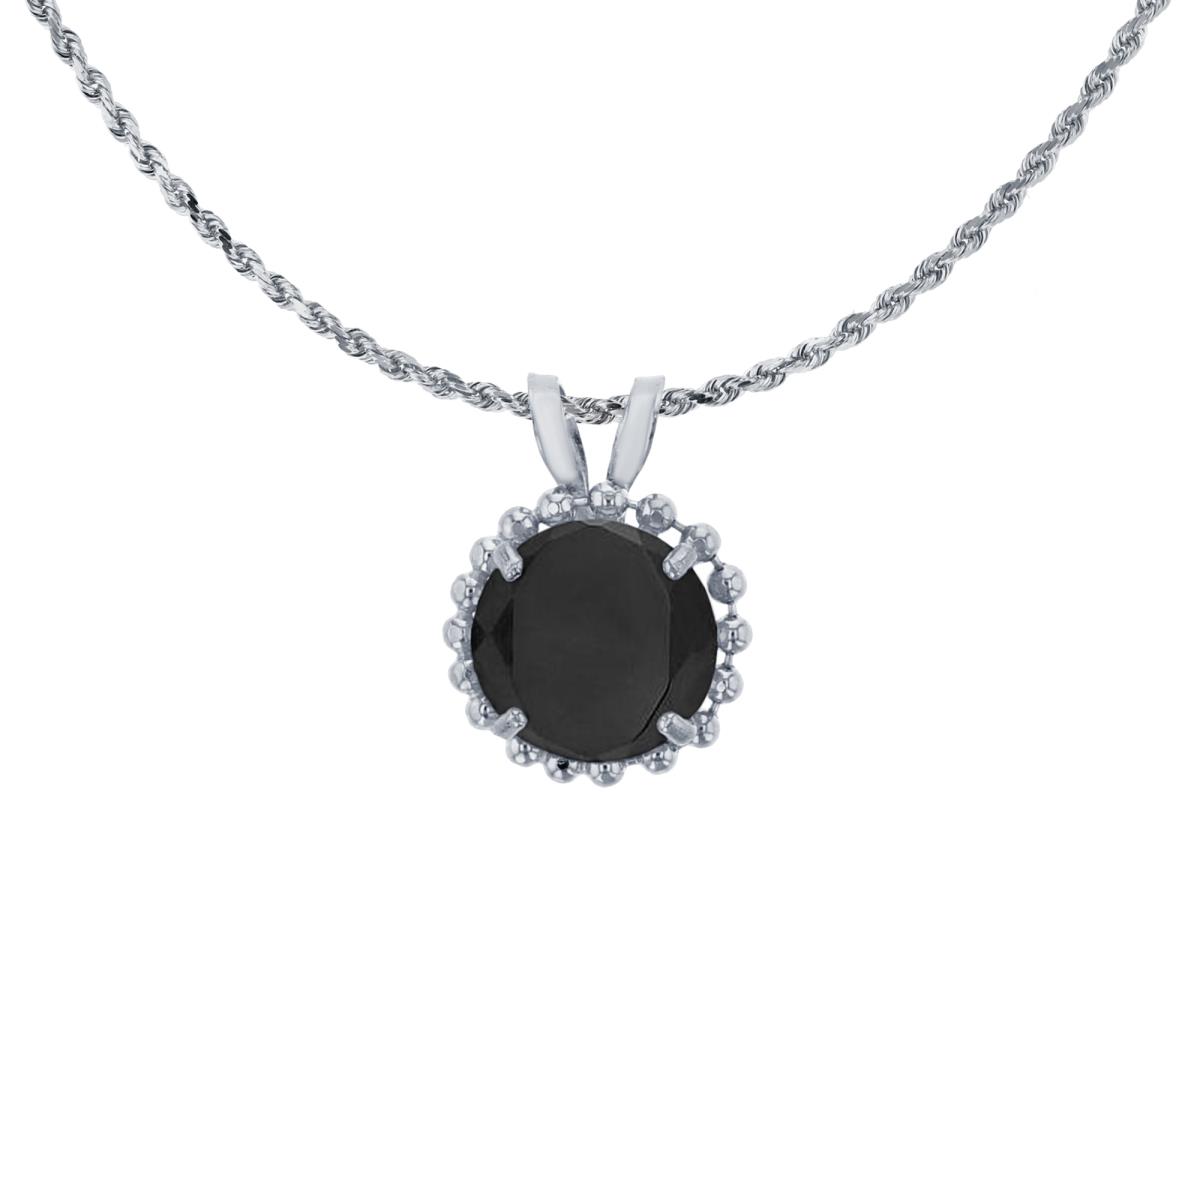 10K White Gold 6mm Rd Cut Onyx with Bead Frame Rabbit Ear 18" Necklace